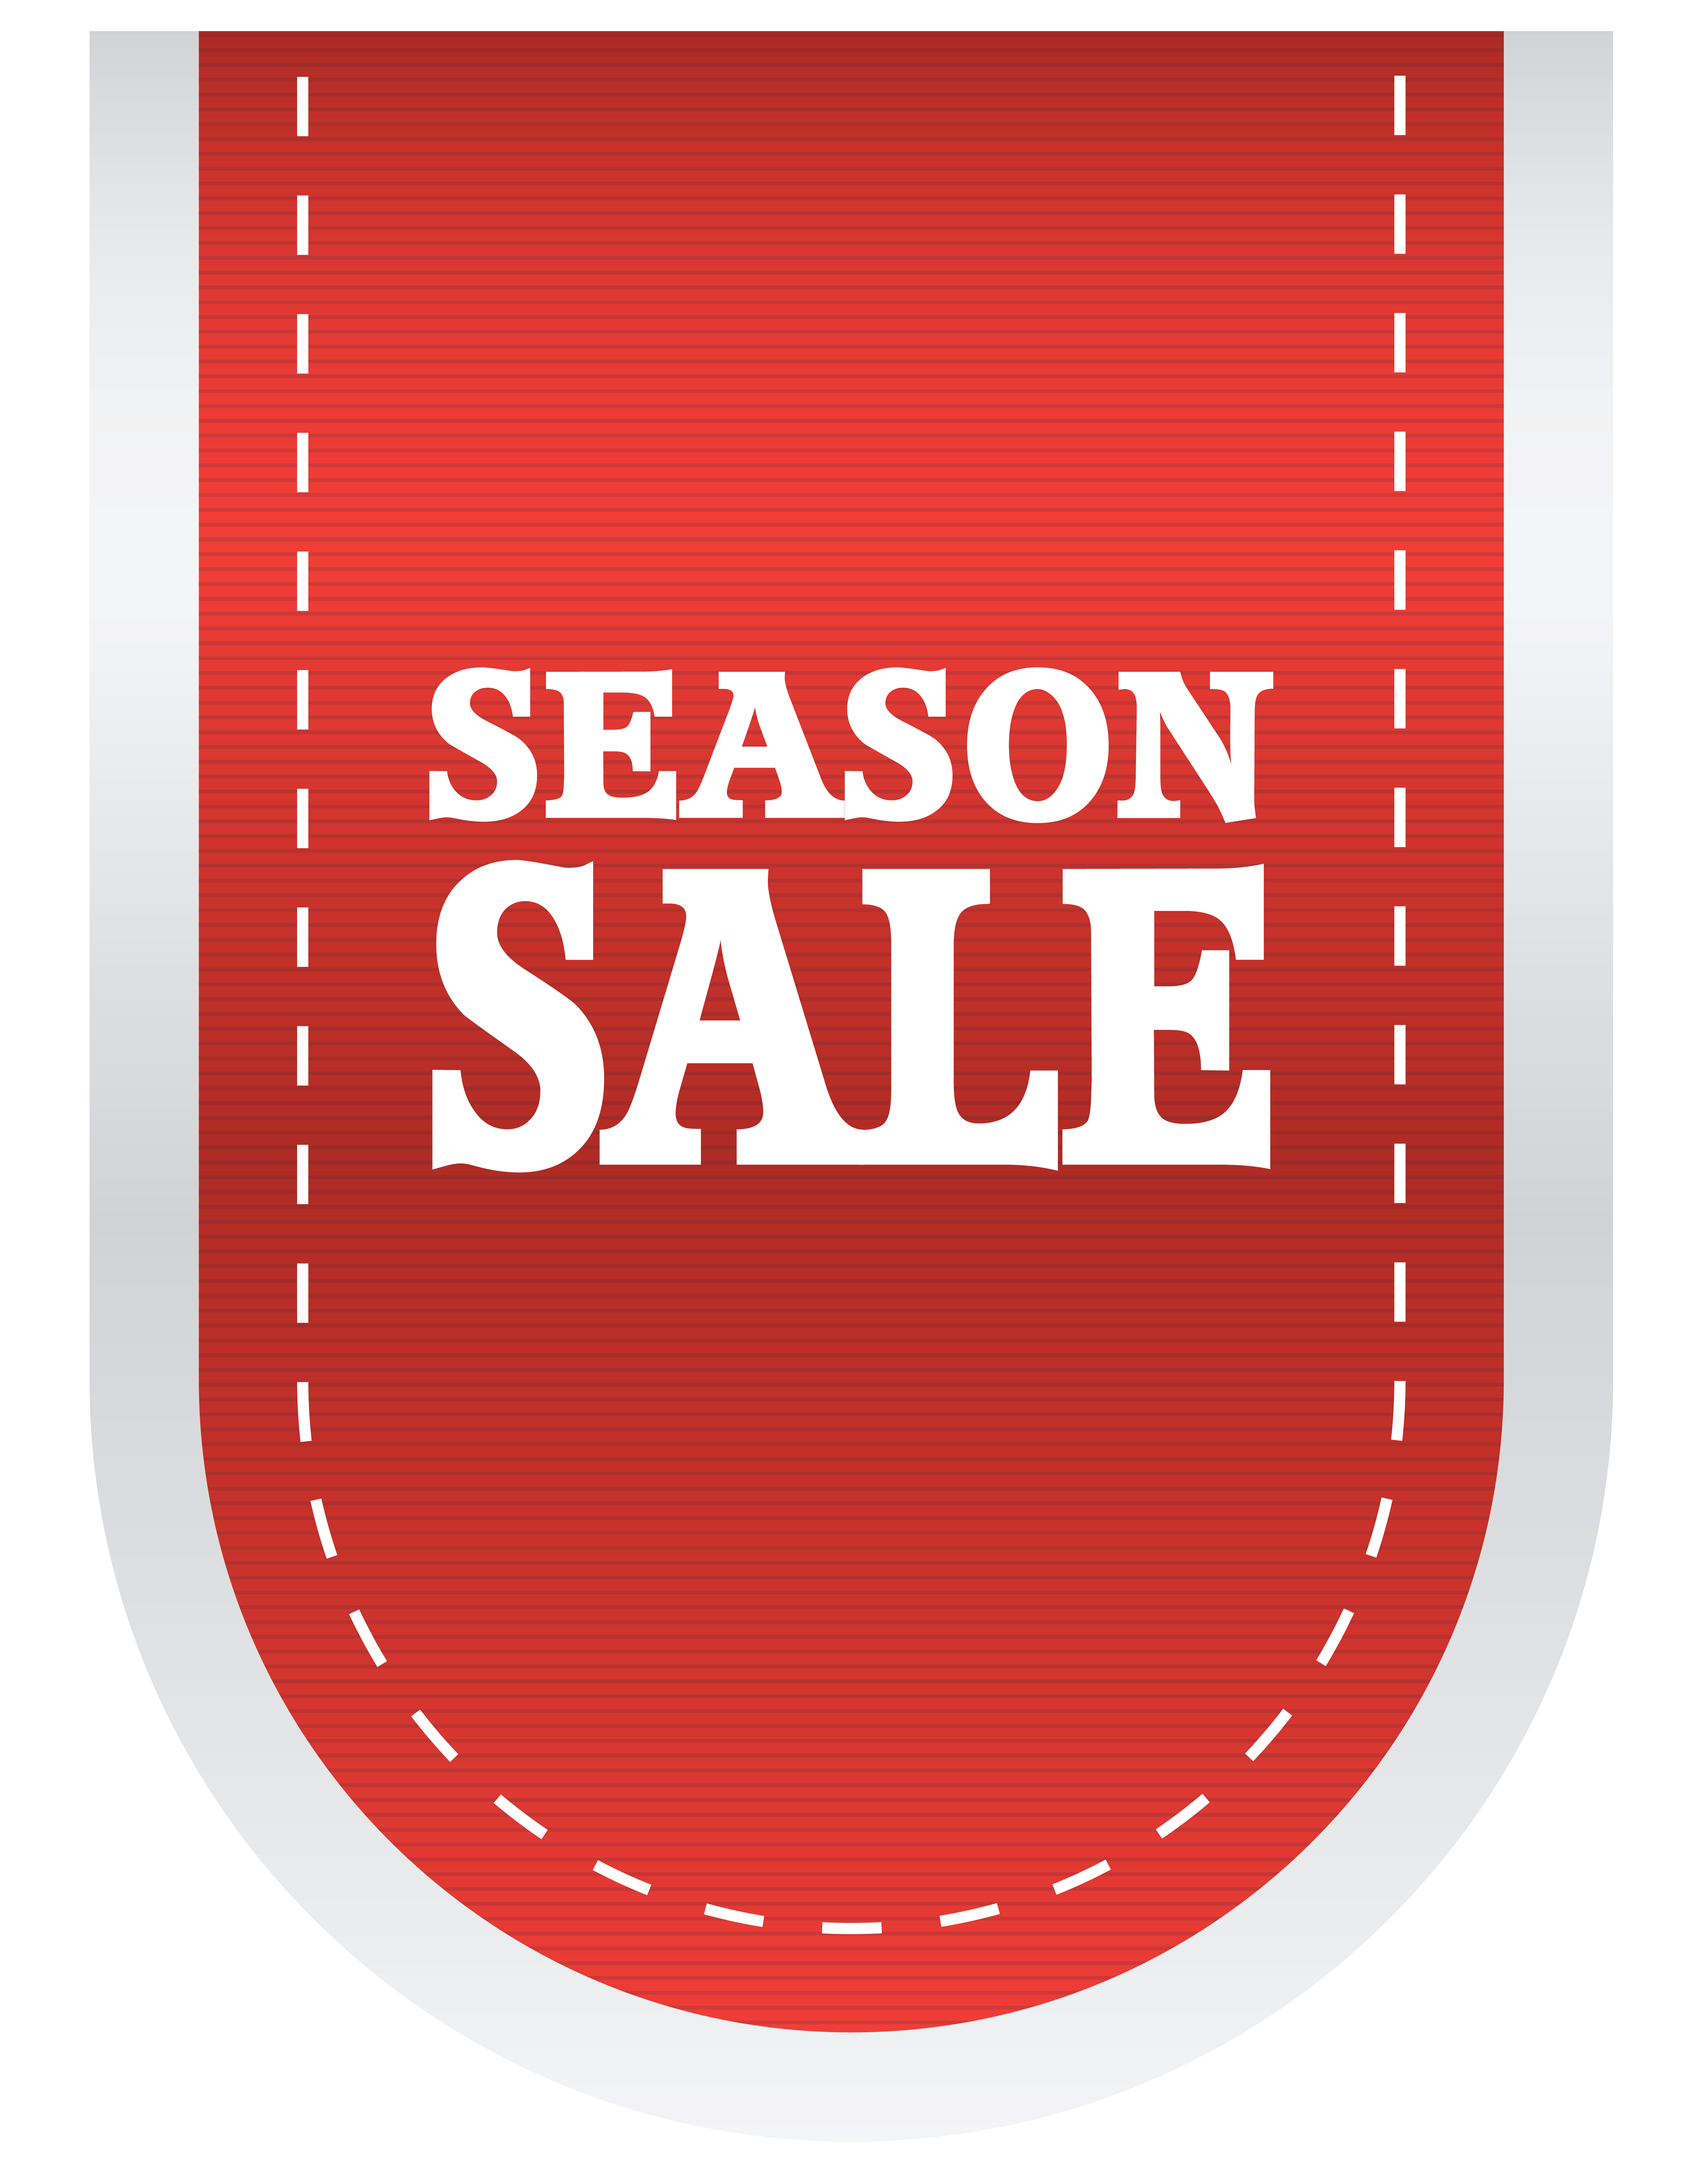 https://gallery.yopriceville.com/var/albums/Free-Clipart-Pictures/Sale-Stickers-PNG/Season_Sale_Label_PNG_Clipart_Image.png?m=1438138501